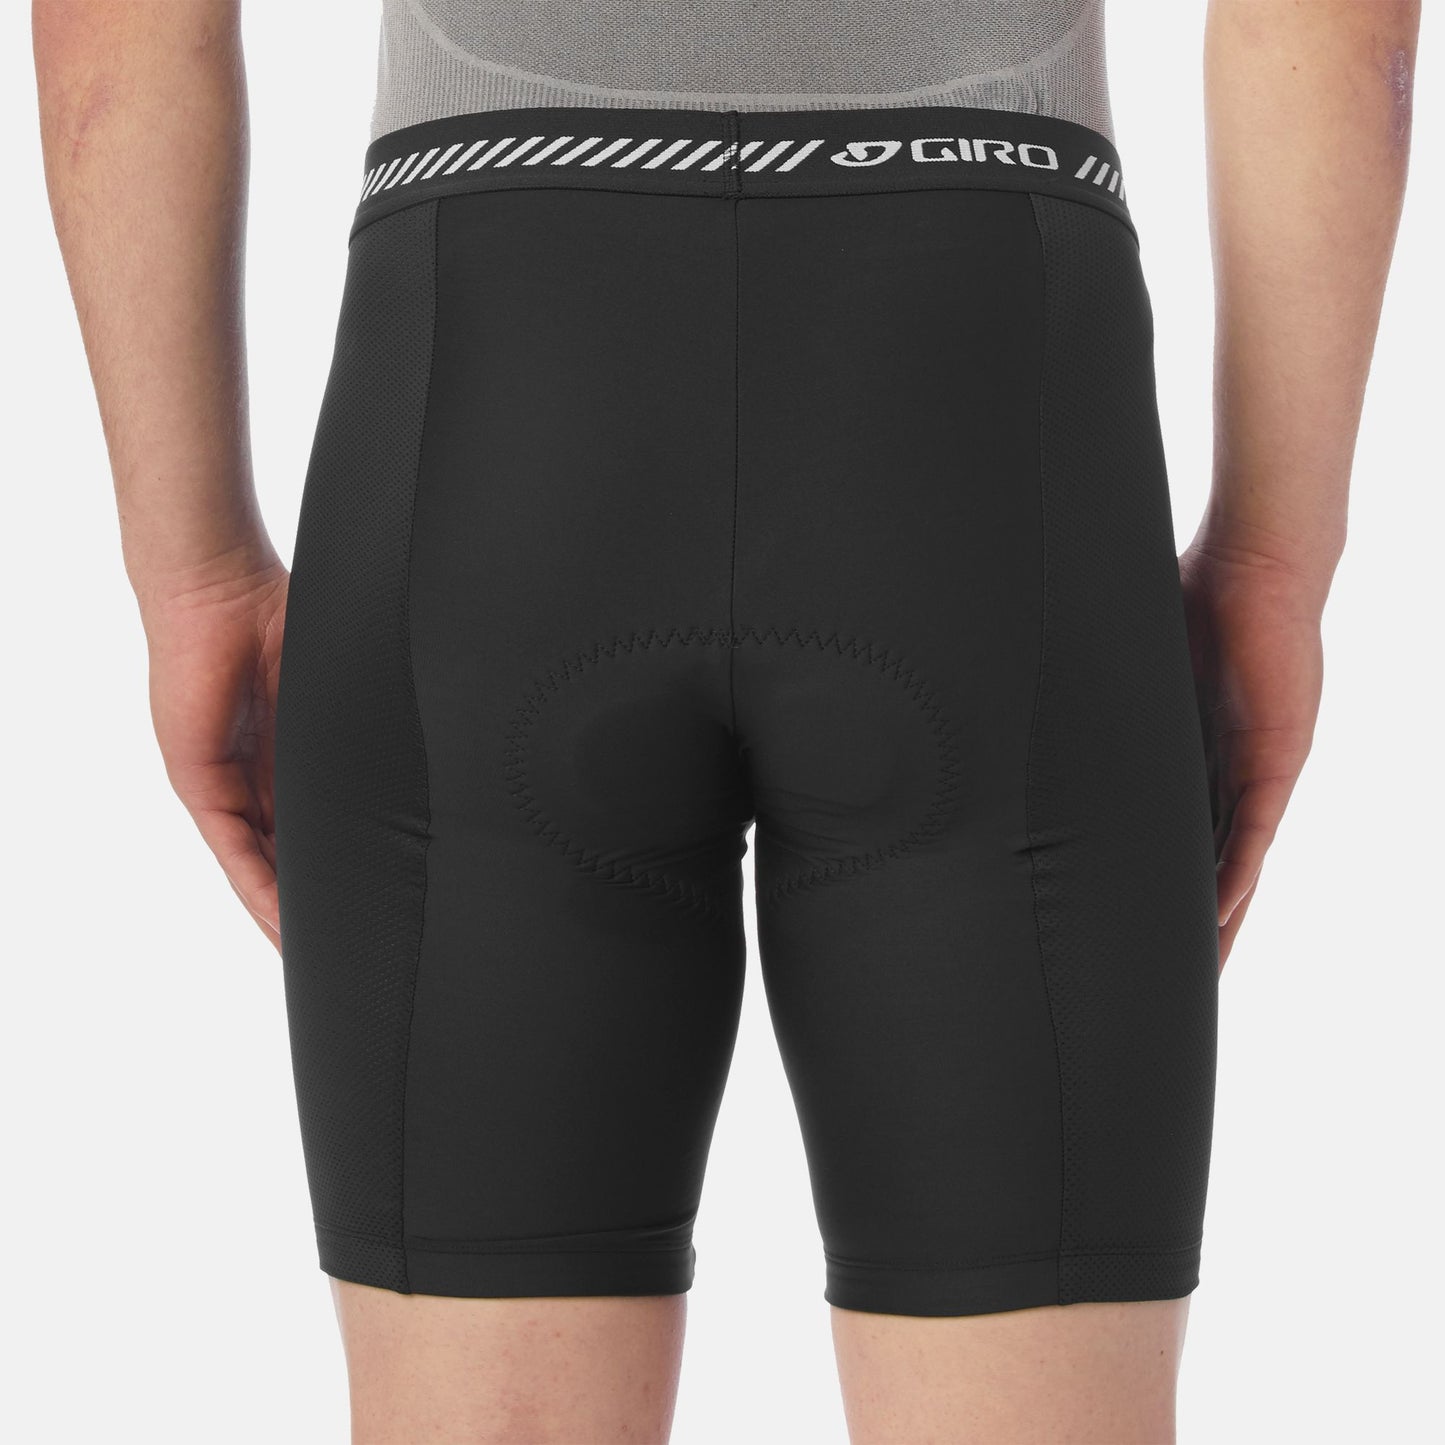 Giro Base Liner Mens Bicycle Protective Liners Black Small